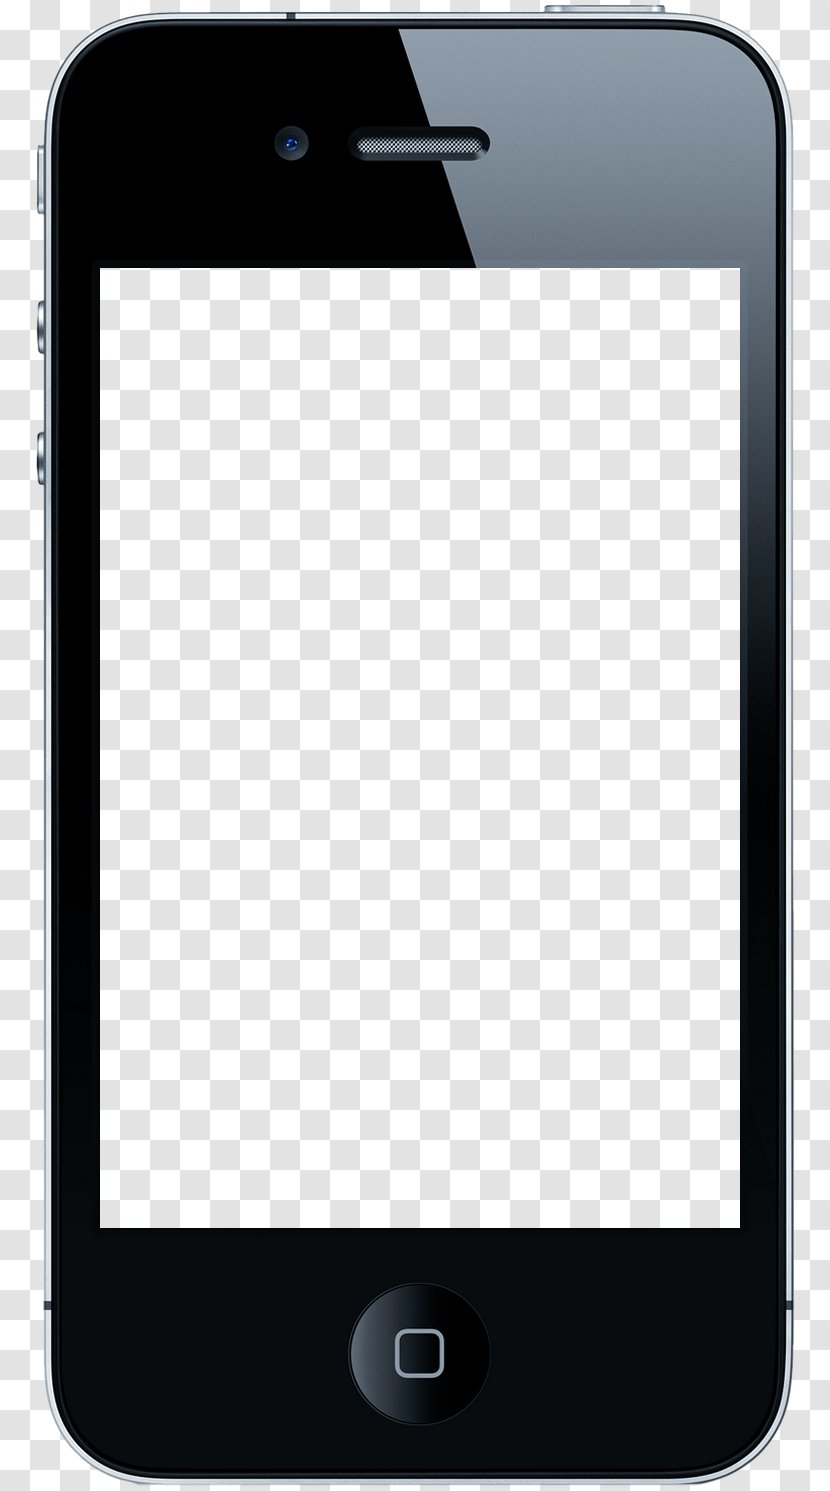 IPhone 4S 3GS Text Messaging IOS IMessage - Rectangle - Apple Iphone Image Transparent PNG